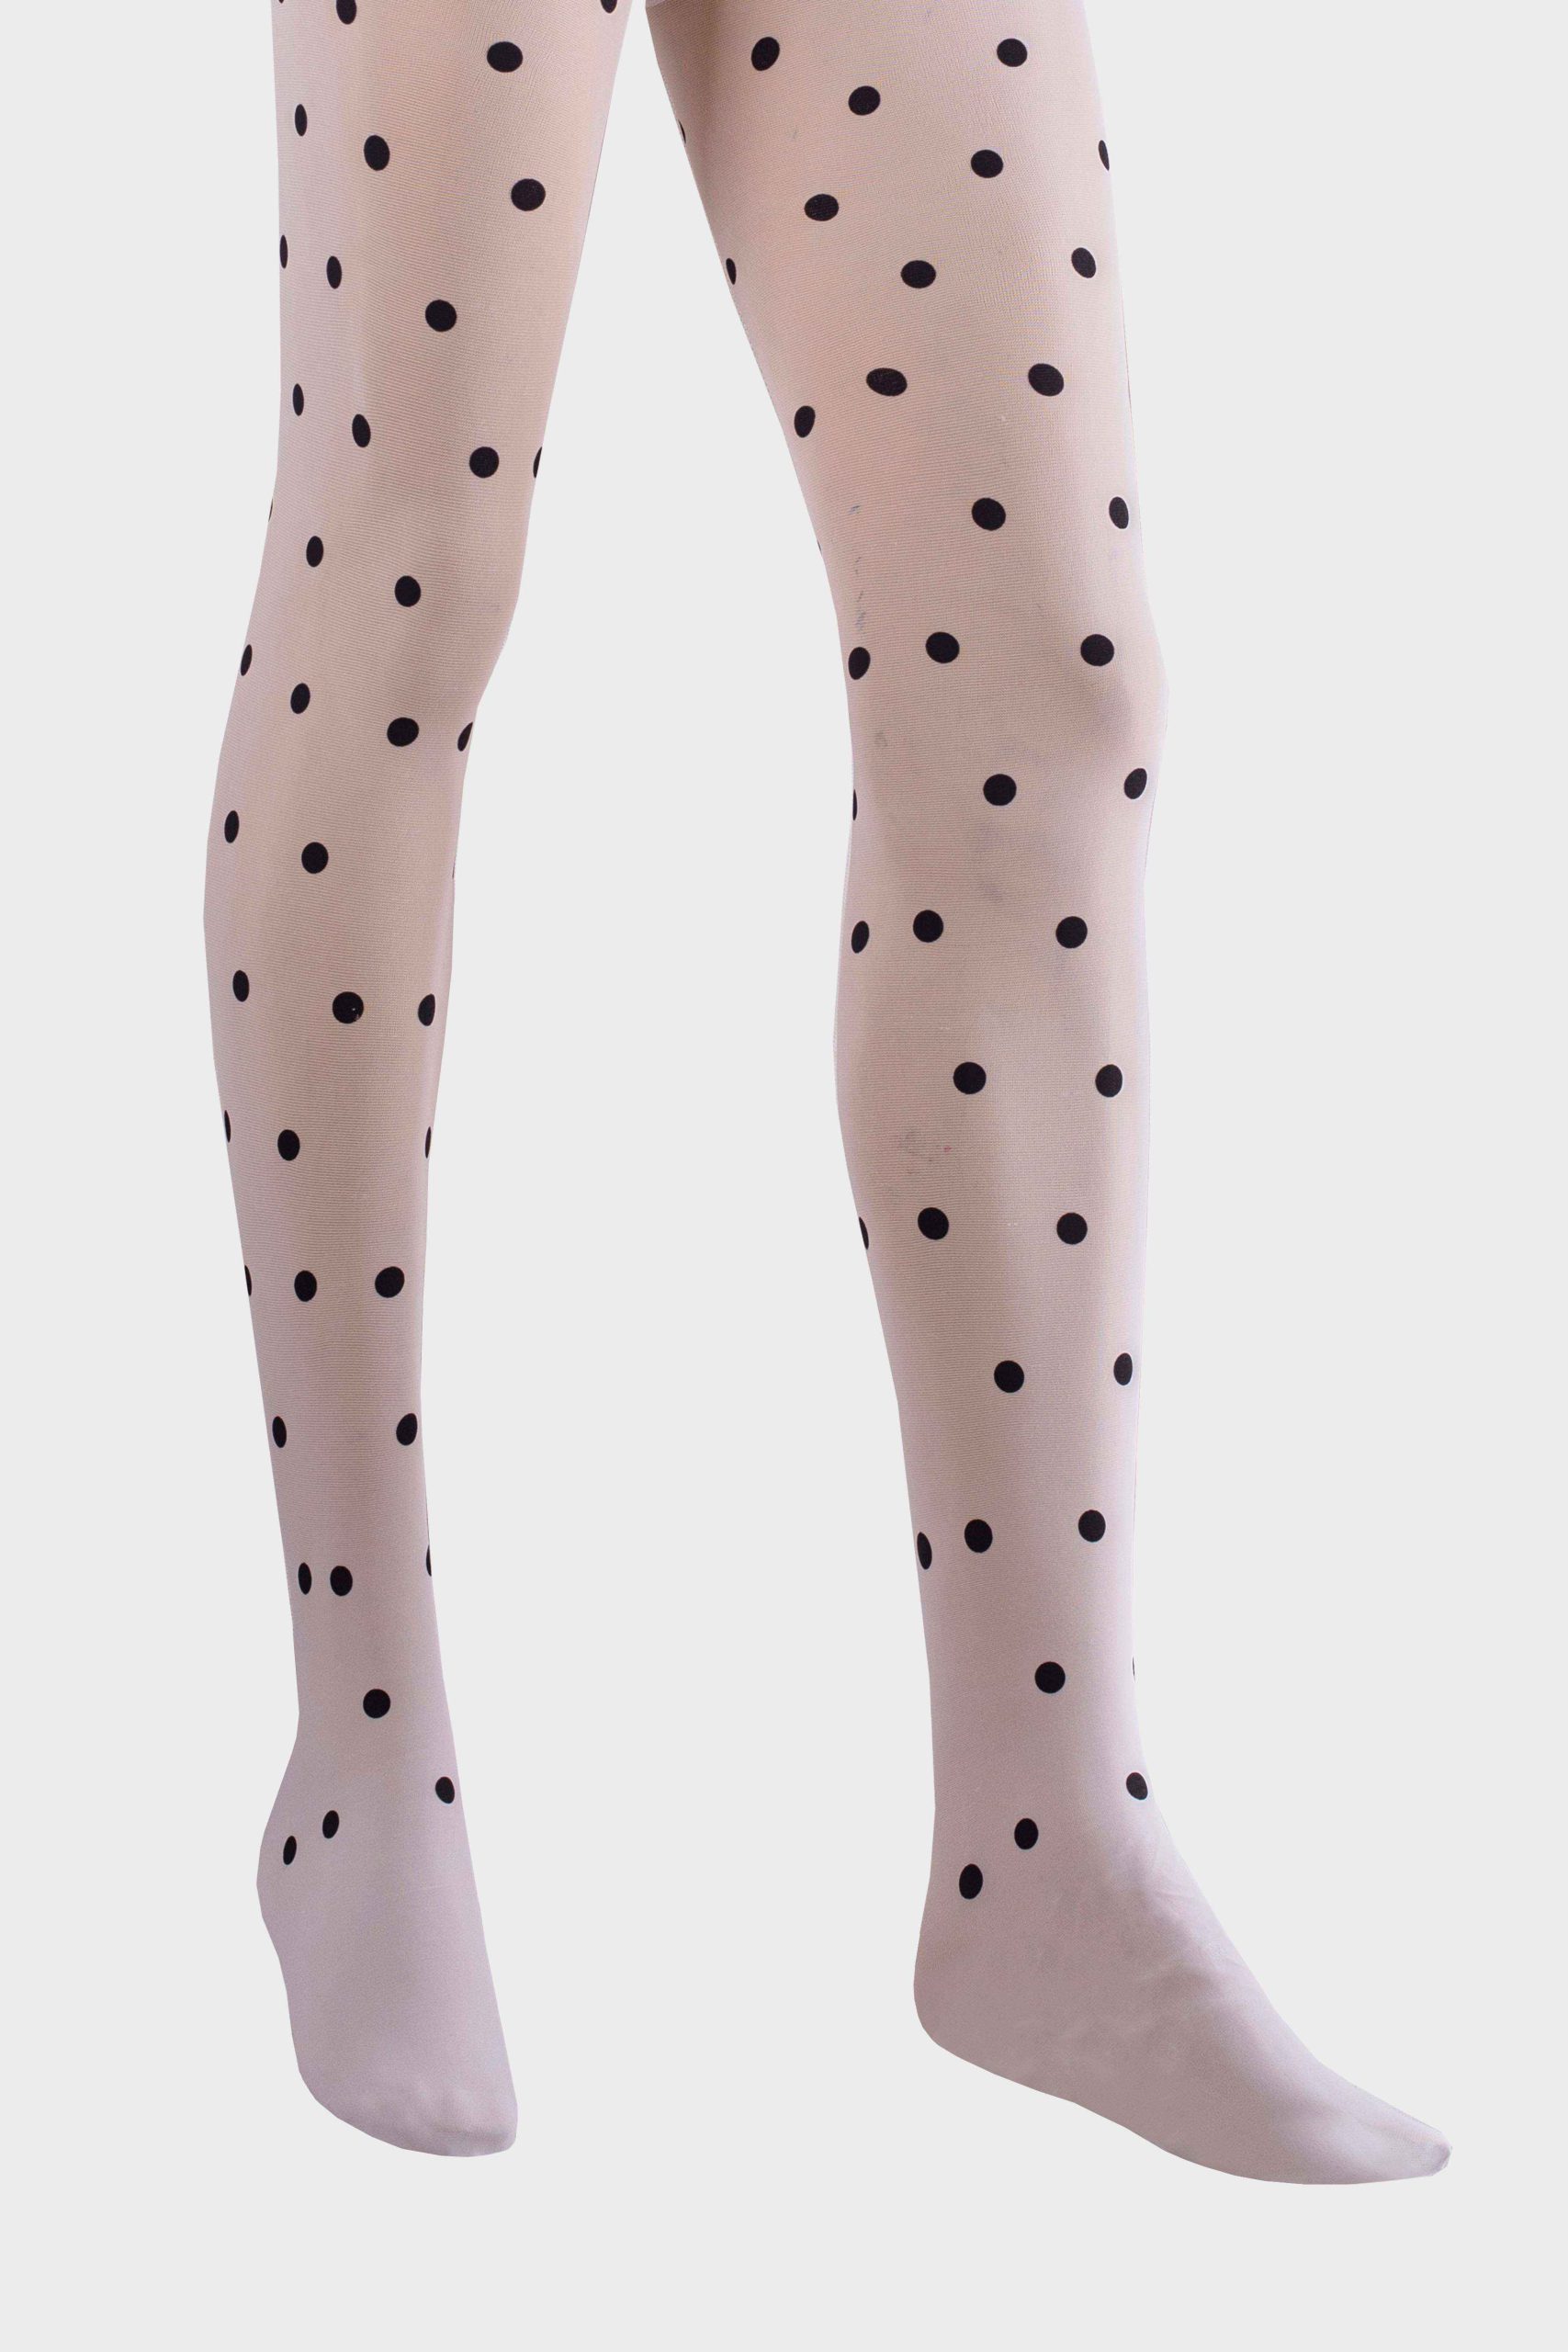 Pantyhose: White with black polka dots - Tattoo Tights